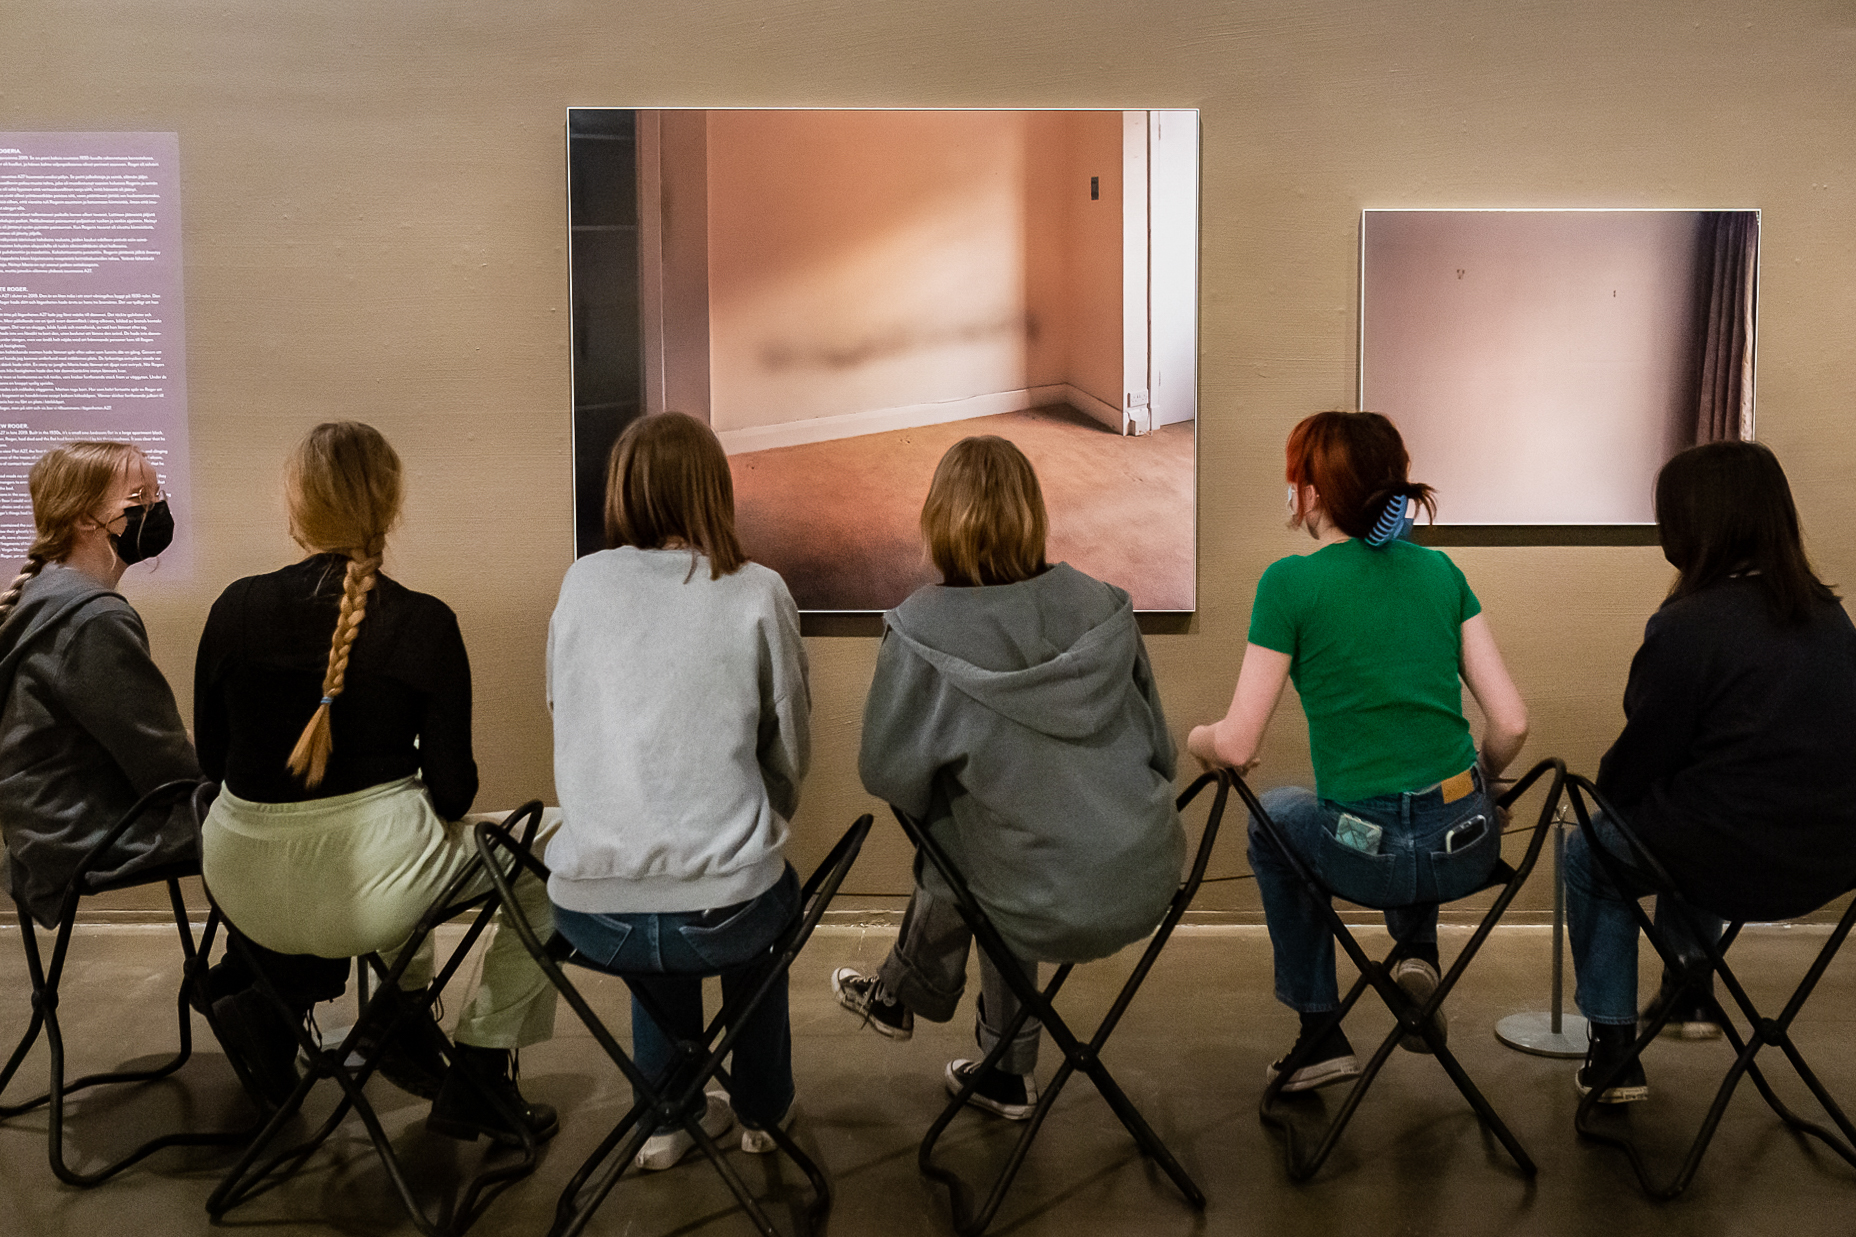 People sitting on chairs in the gallery space.